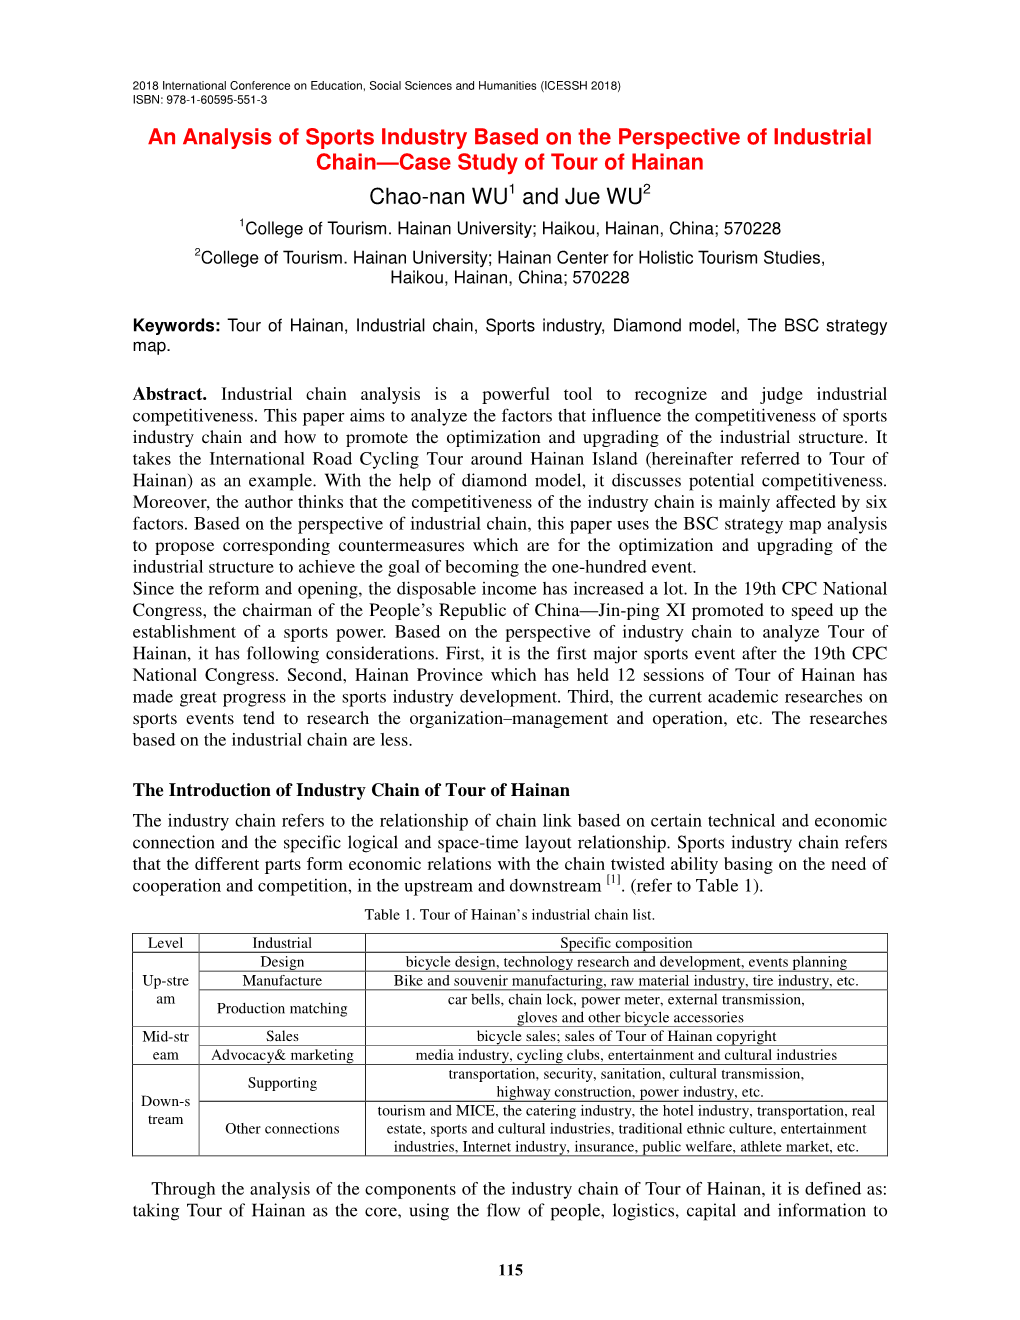 An Analysis of Sports Industry Based on the Perspective of Industrial Chain—Case Study of Tour of Hainan Chao-Nan WU1 and Jue WU2 1College of Tourism